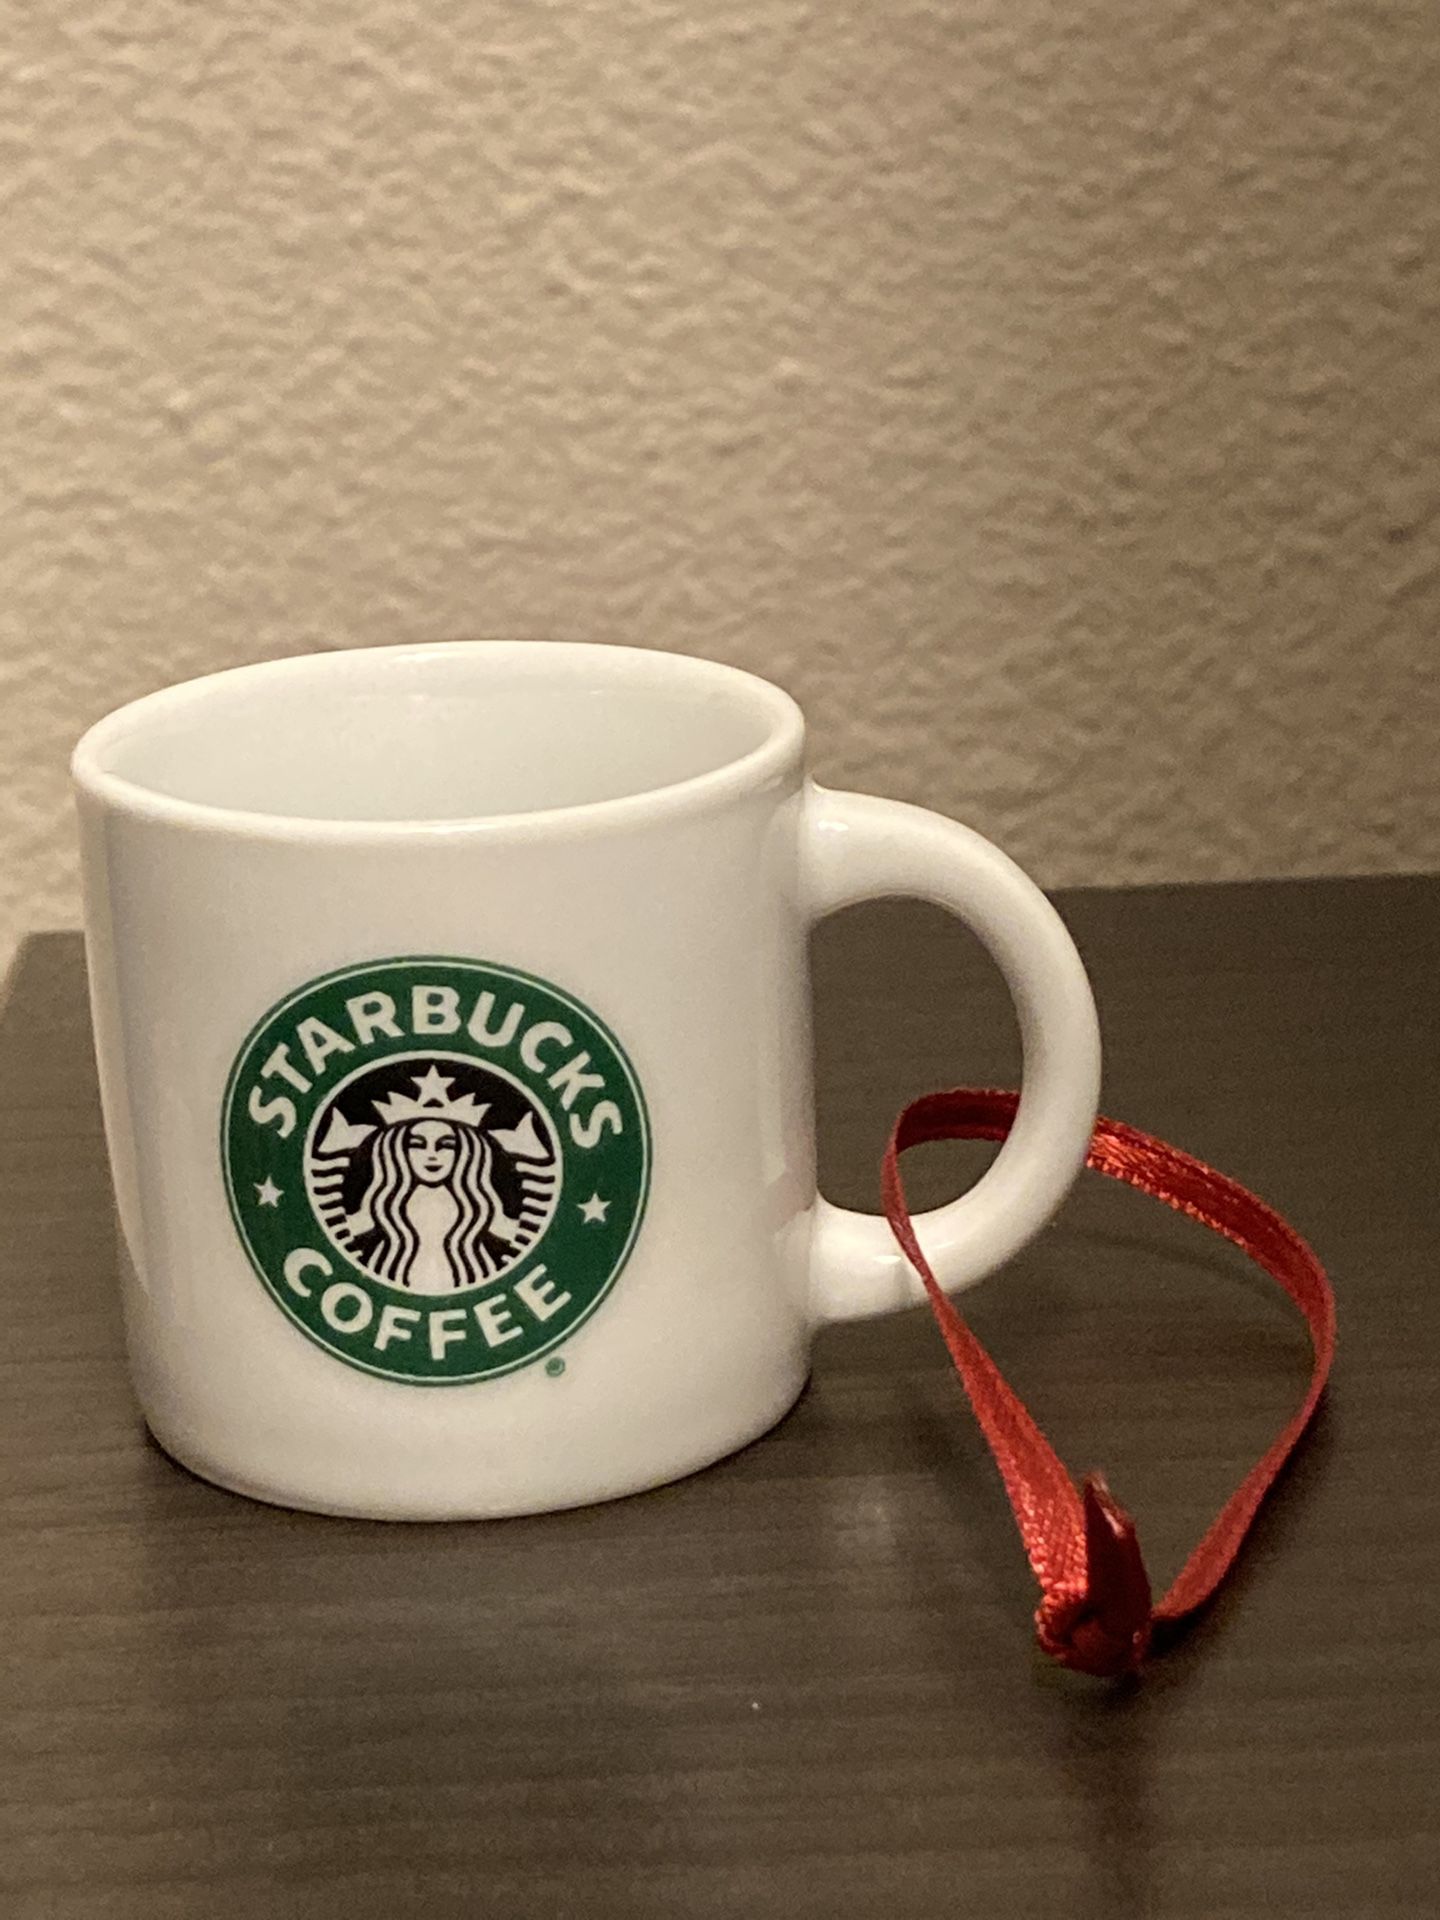 Starbucks Ornaments. for Sale in Ontario, CA - OfferUp